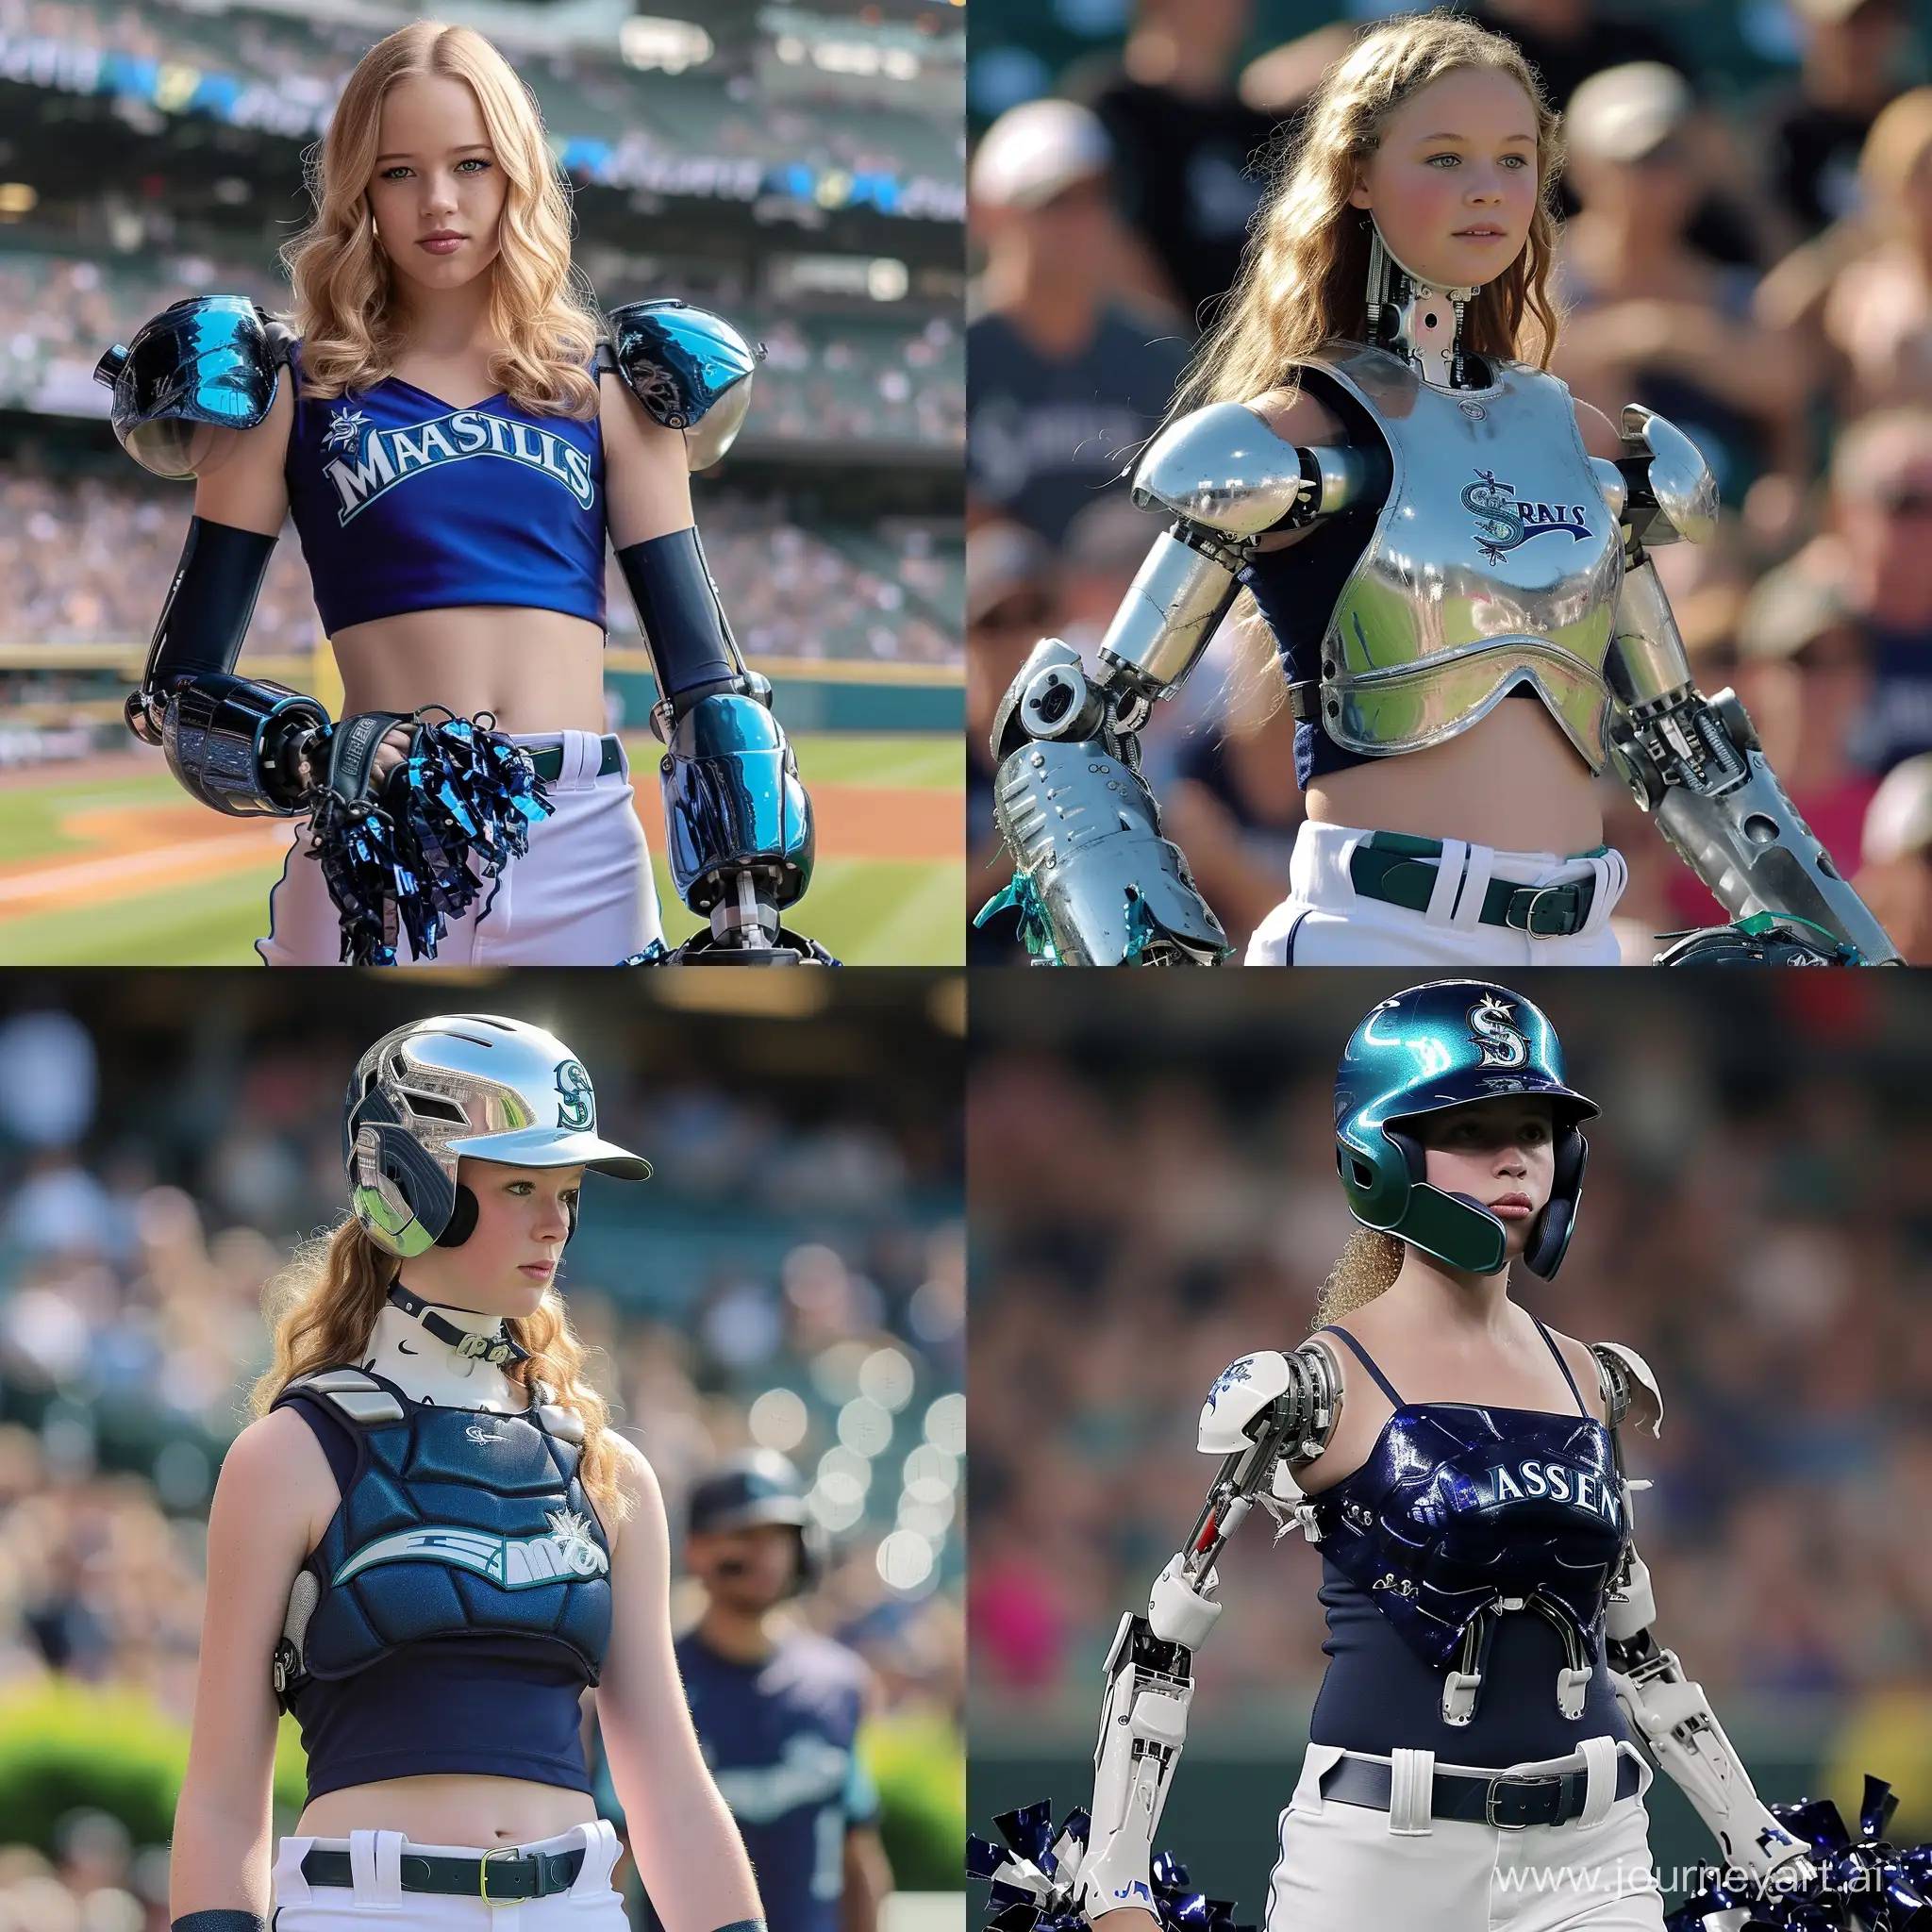 Seattle Mariners 13-14 year old cheerleader, turns out to be a robot, malfunctioning